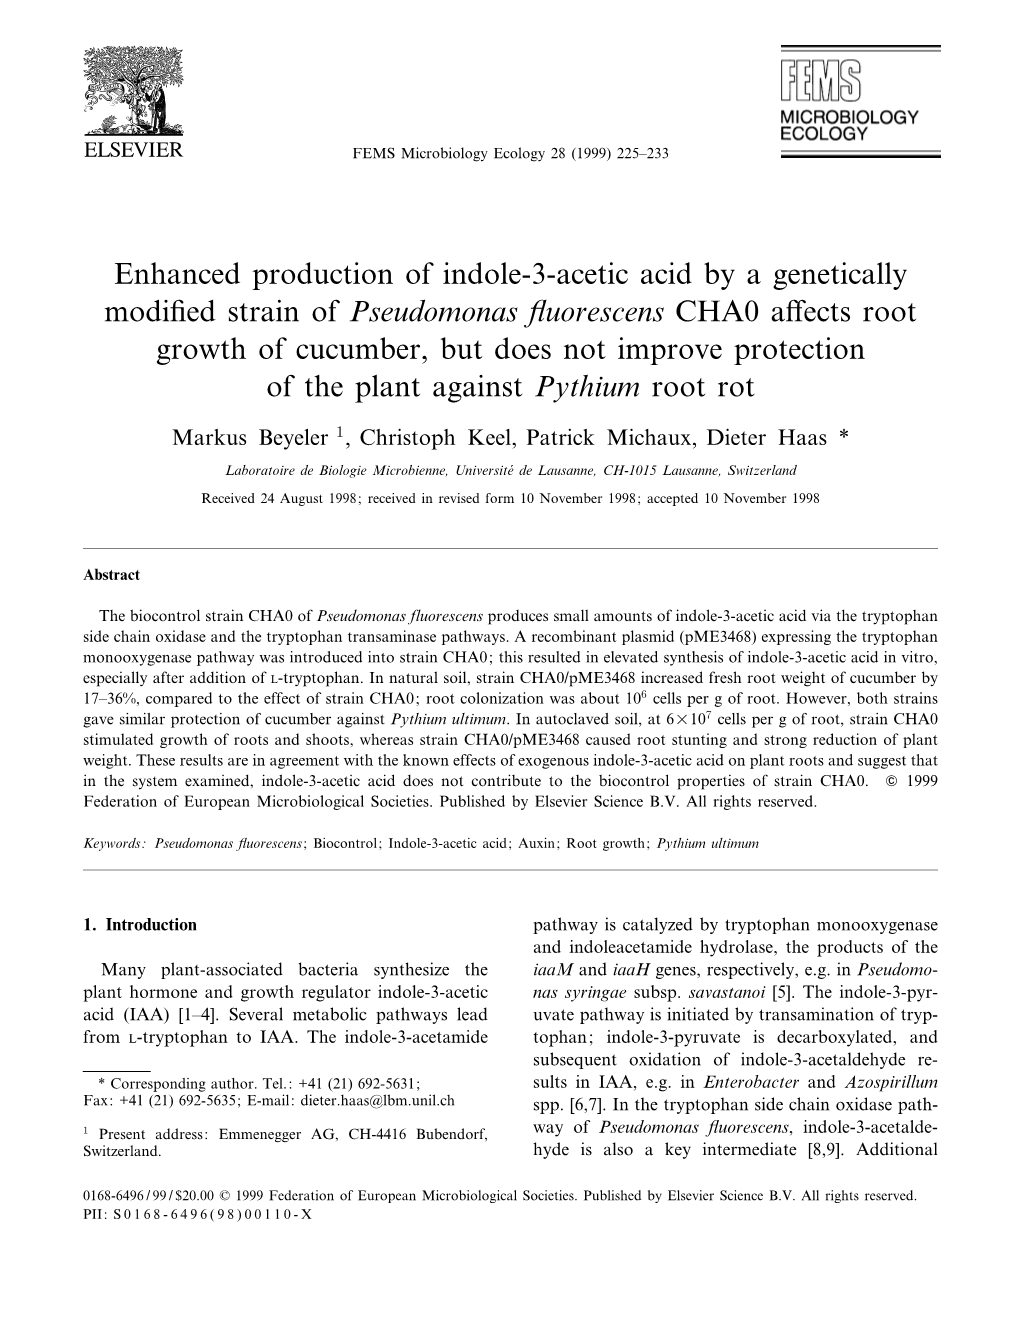 Enhanced Production of Indole-3-Acetic Acid by A